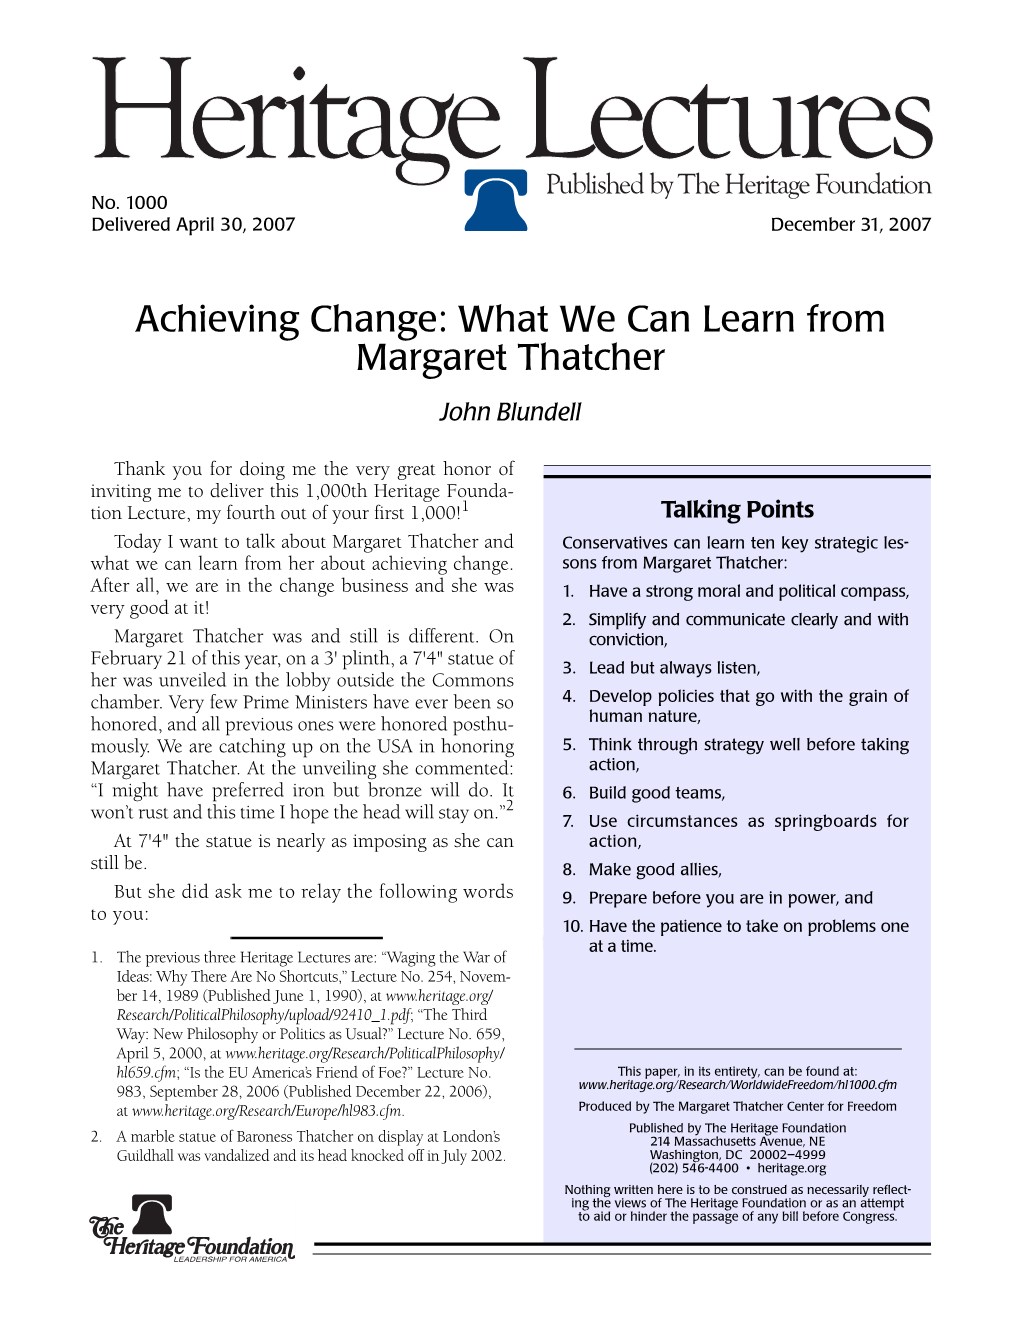 Achieving Change: What We Can Learn from Margaret Thatcher John Blundell